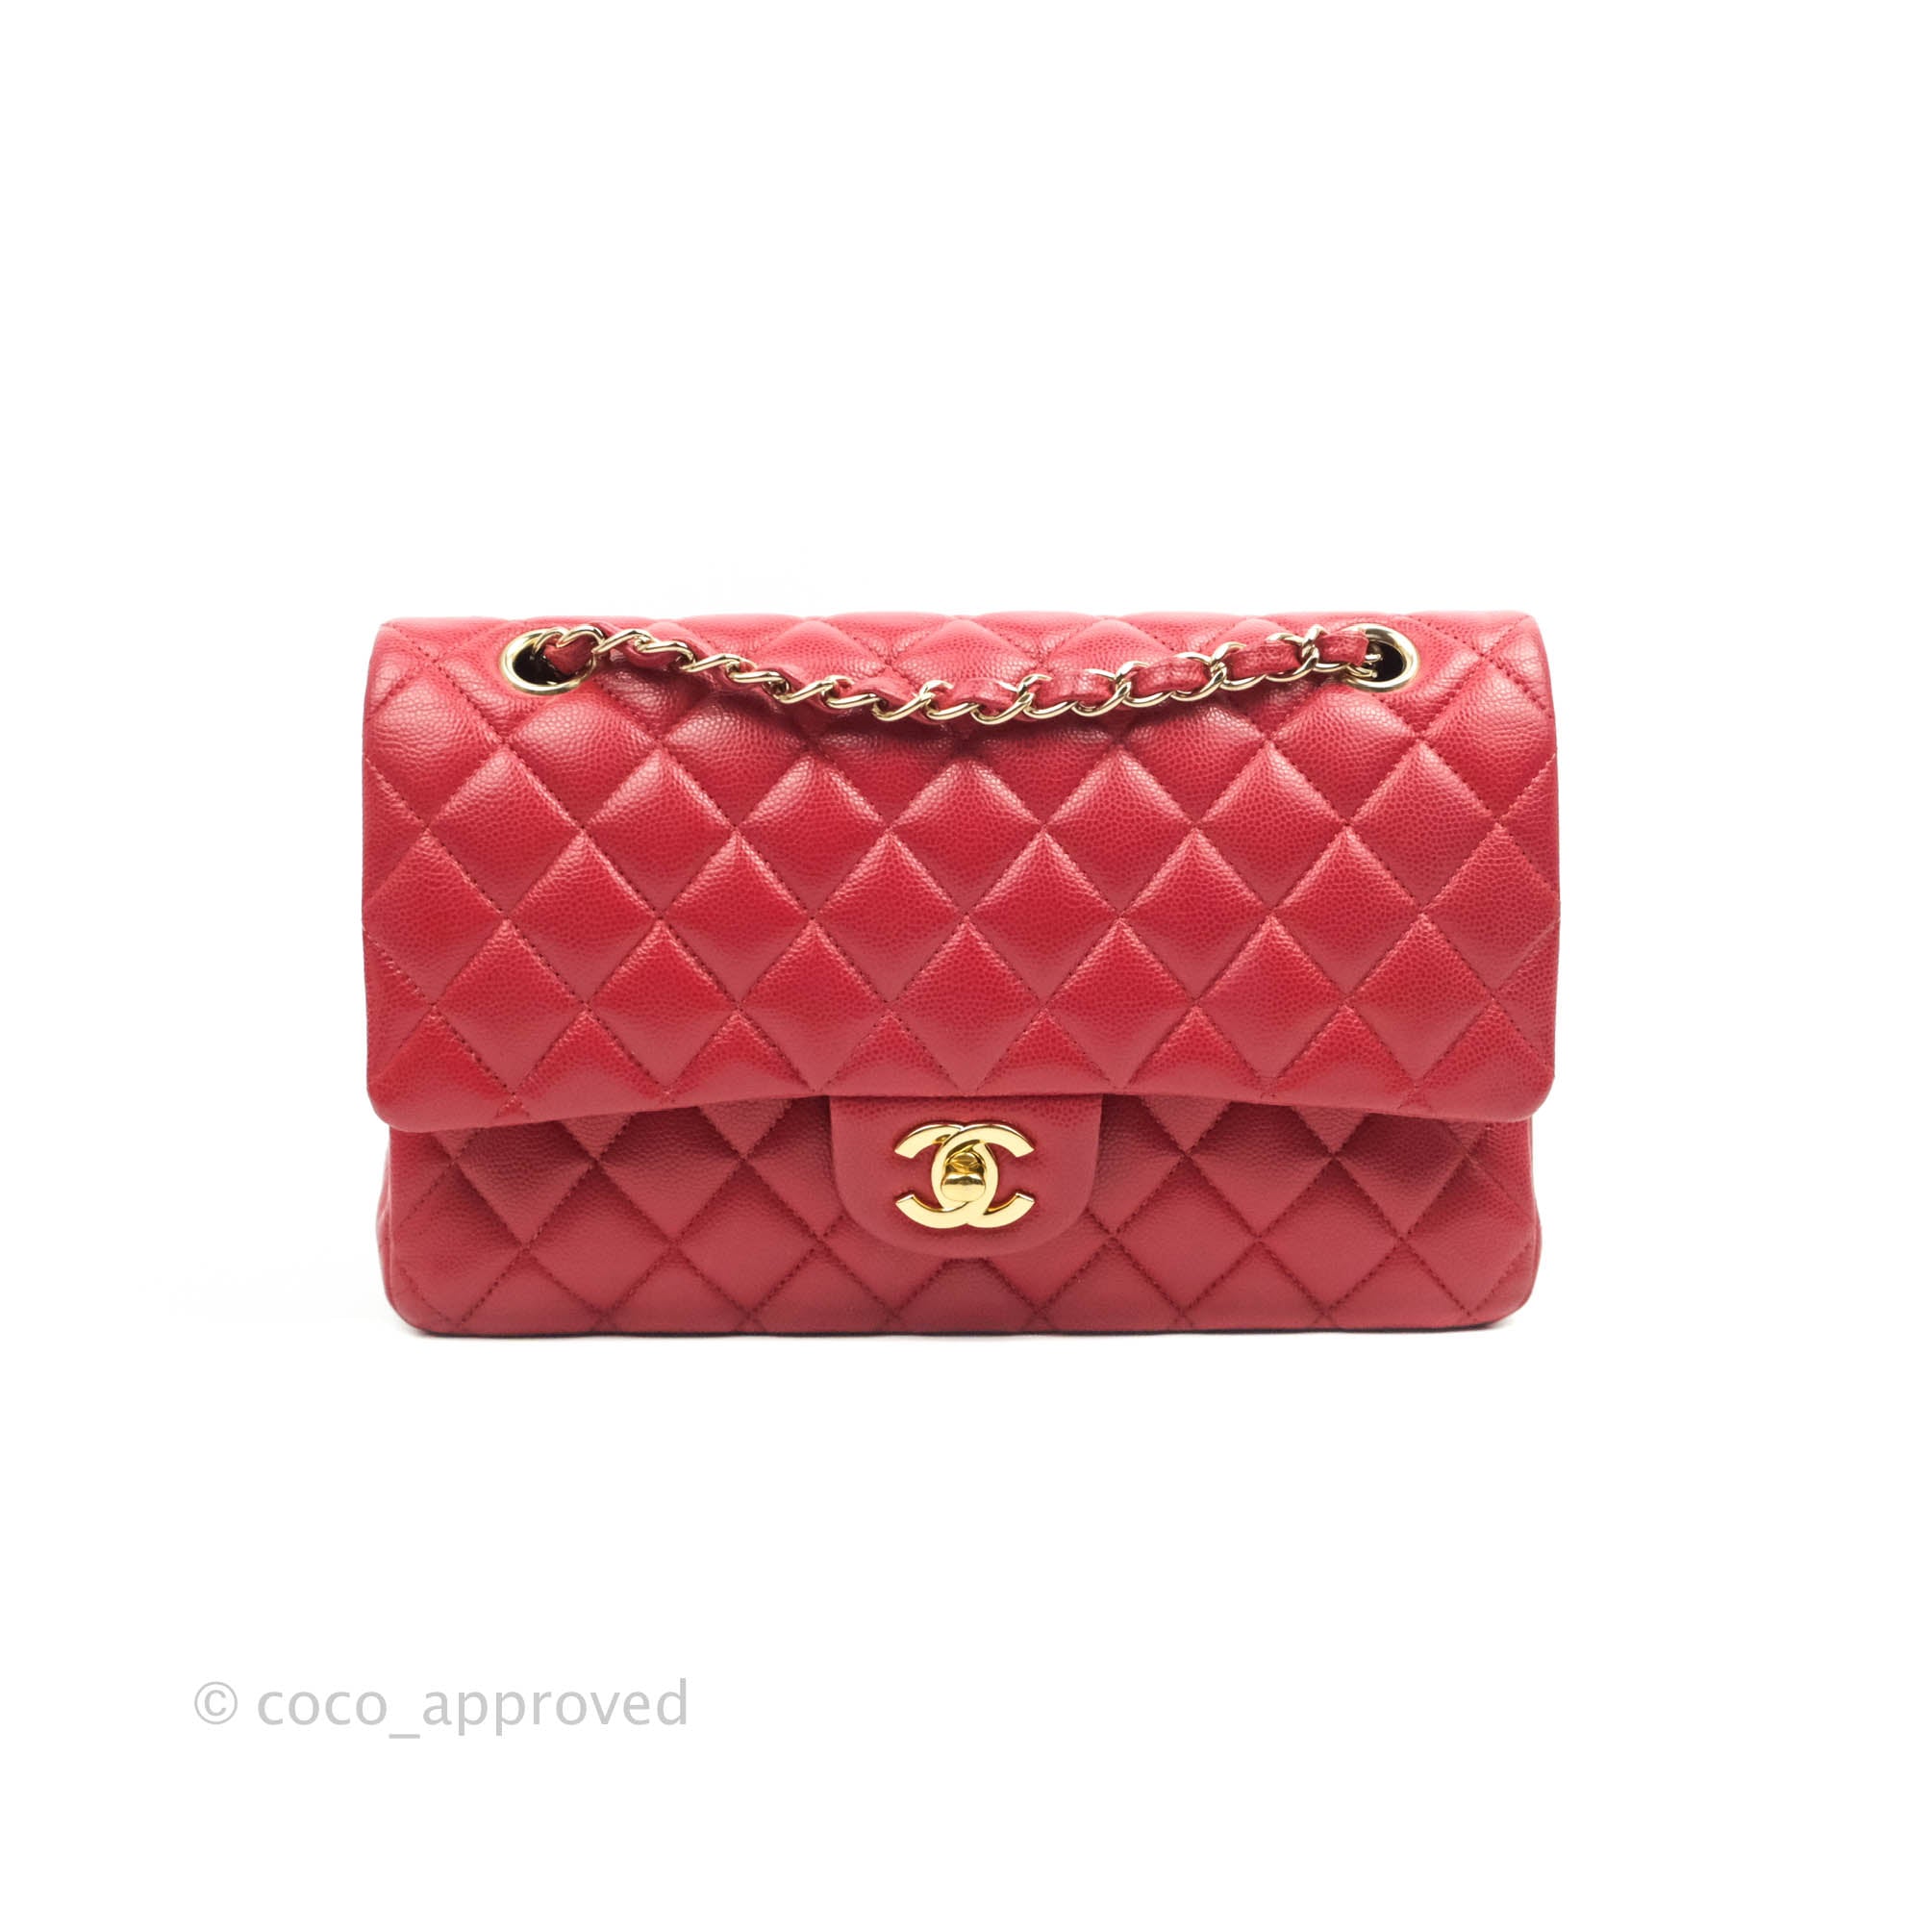 Sold at Auction: A Medium Red Chanel Timeless CC Soft Tote Chanel